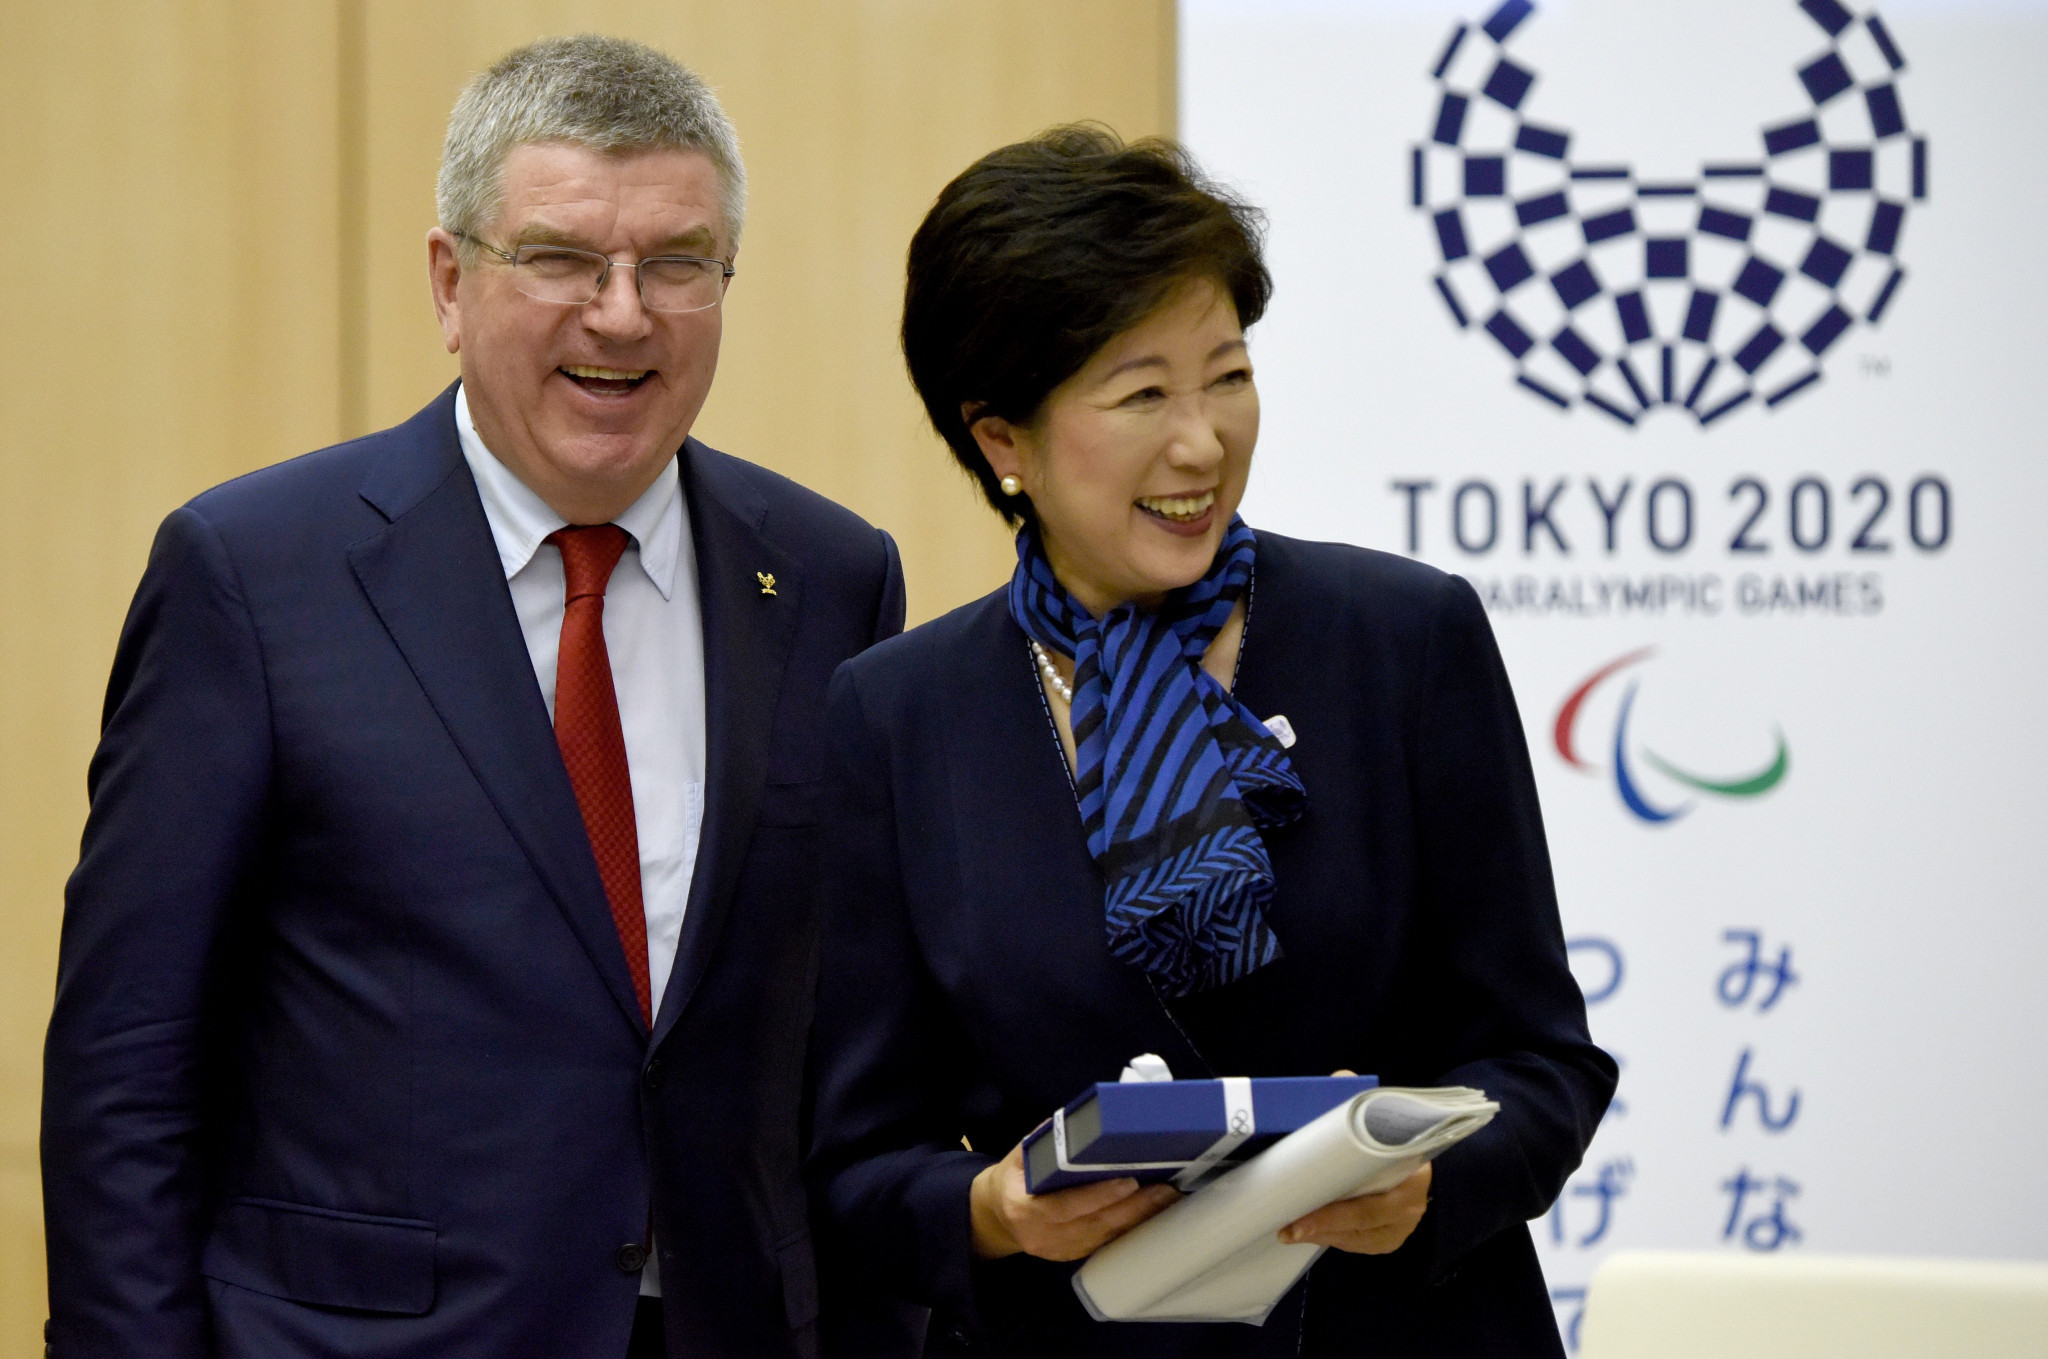 Thomas Bach will meet with Tokyo Governor Yuriko Koike during his visit to Japan ©Getty Images